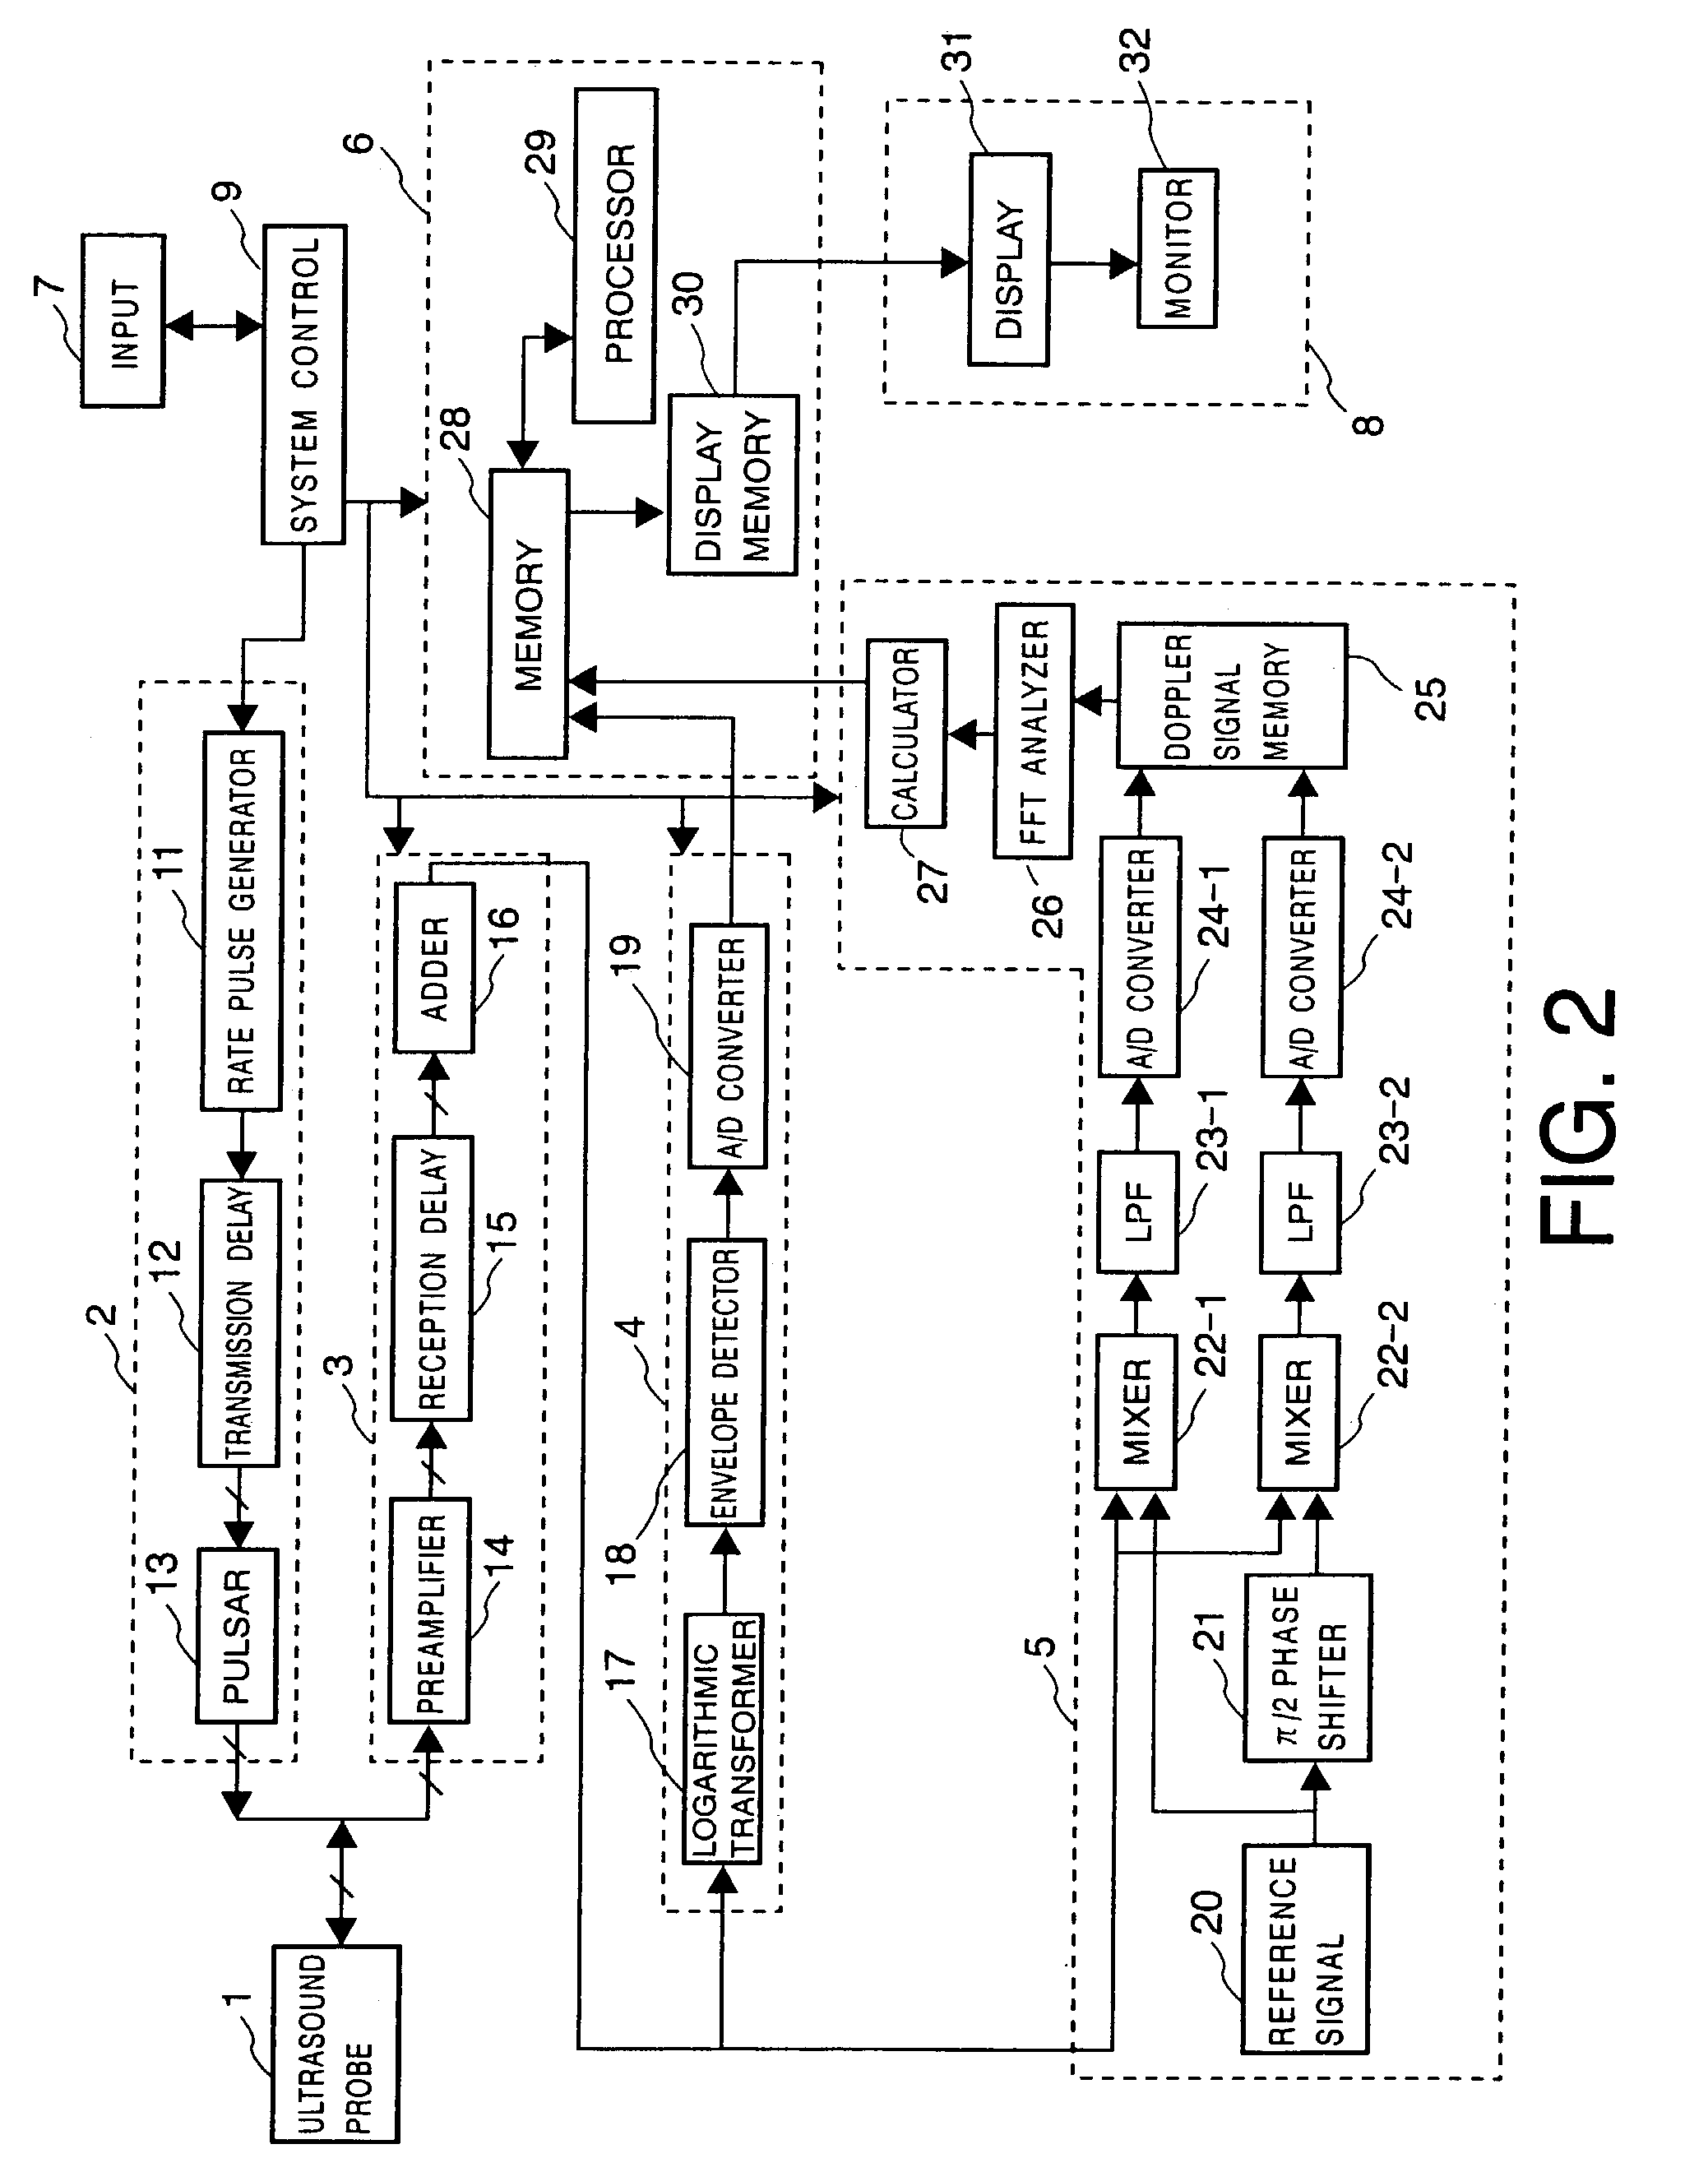 Ultrasound diagnosis apparatus that adjusts a time phase between a plurality of image series